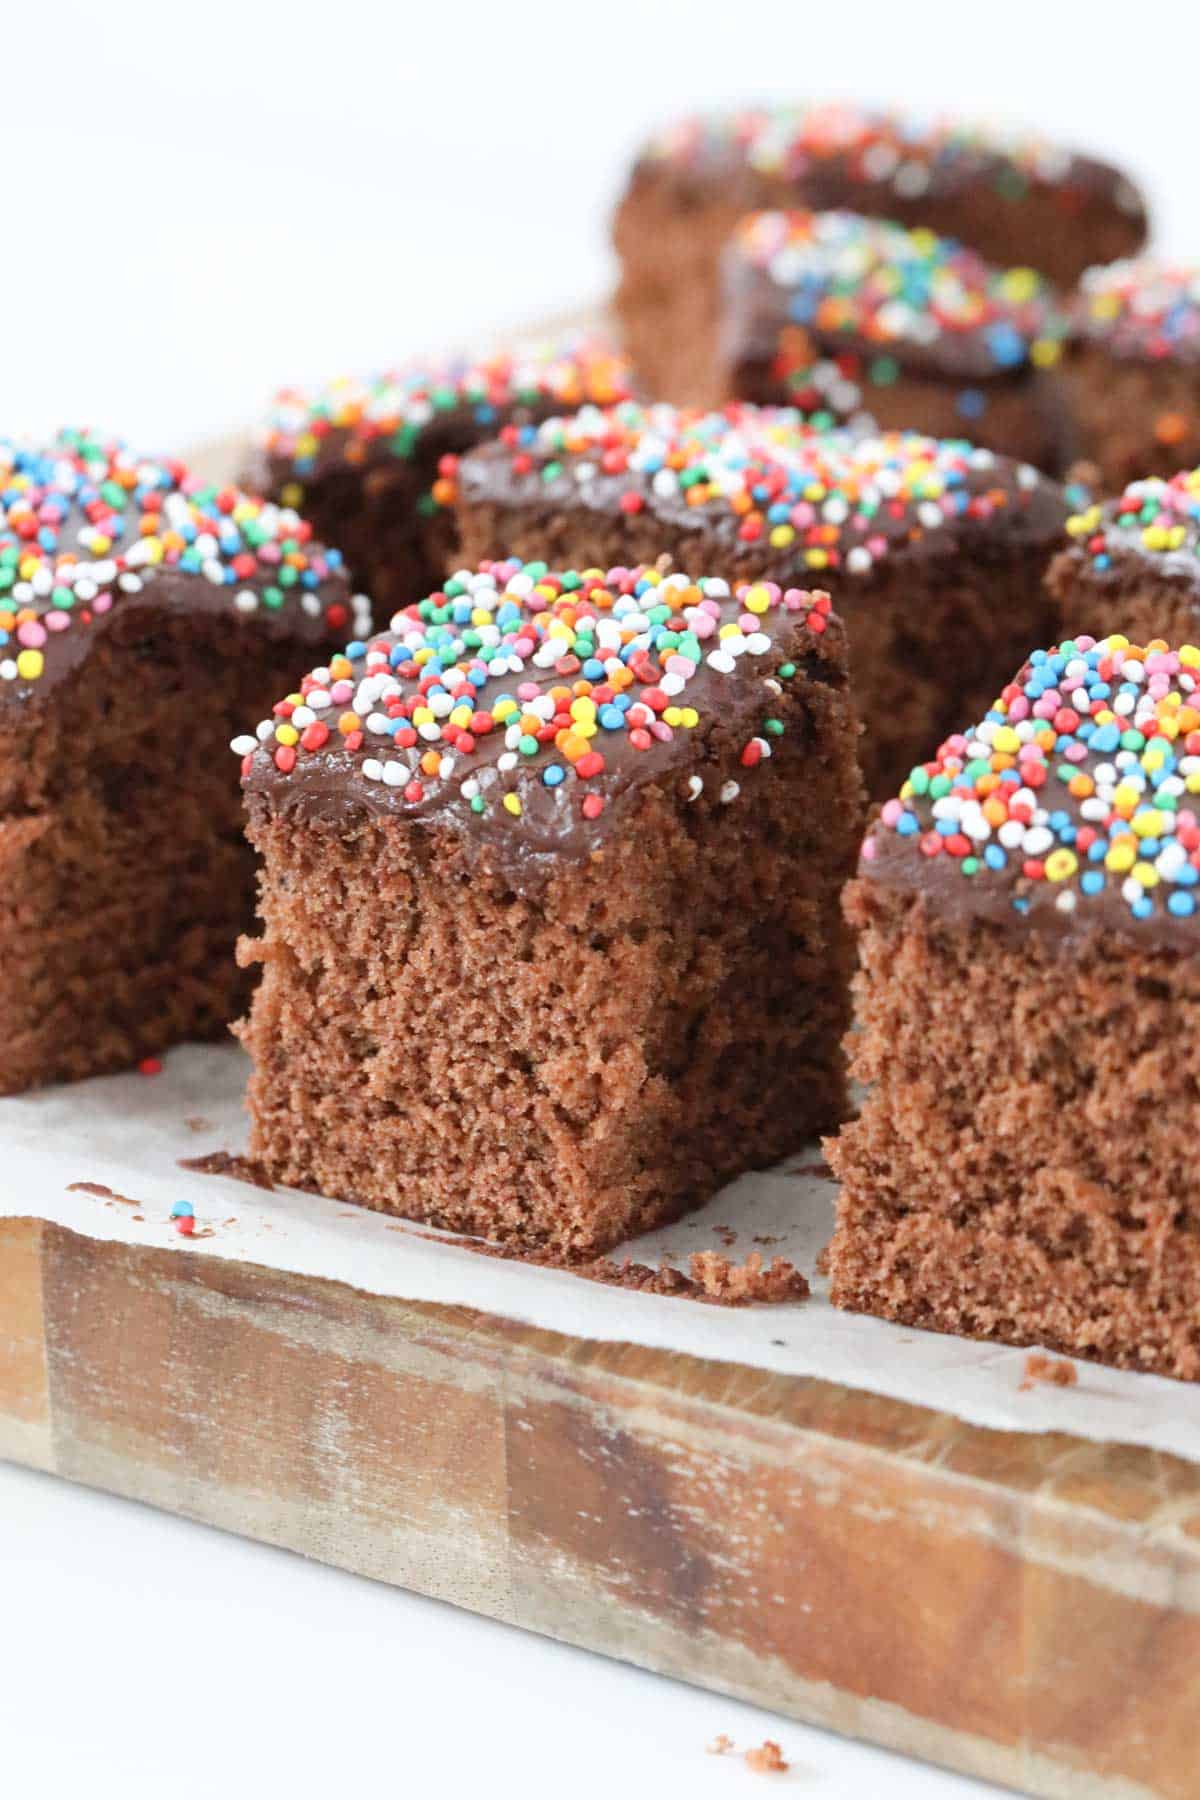 Slices of fluffy chocolate cake topped with icing and sprinkles